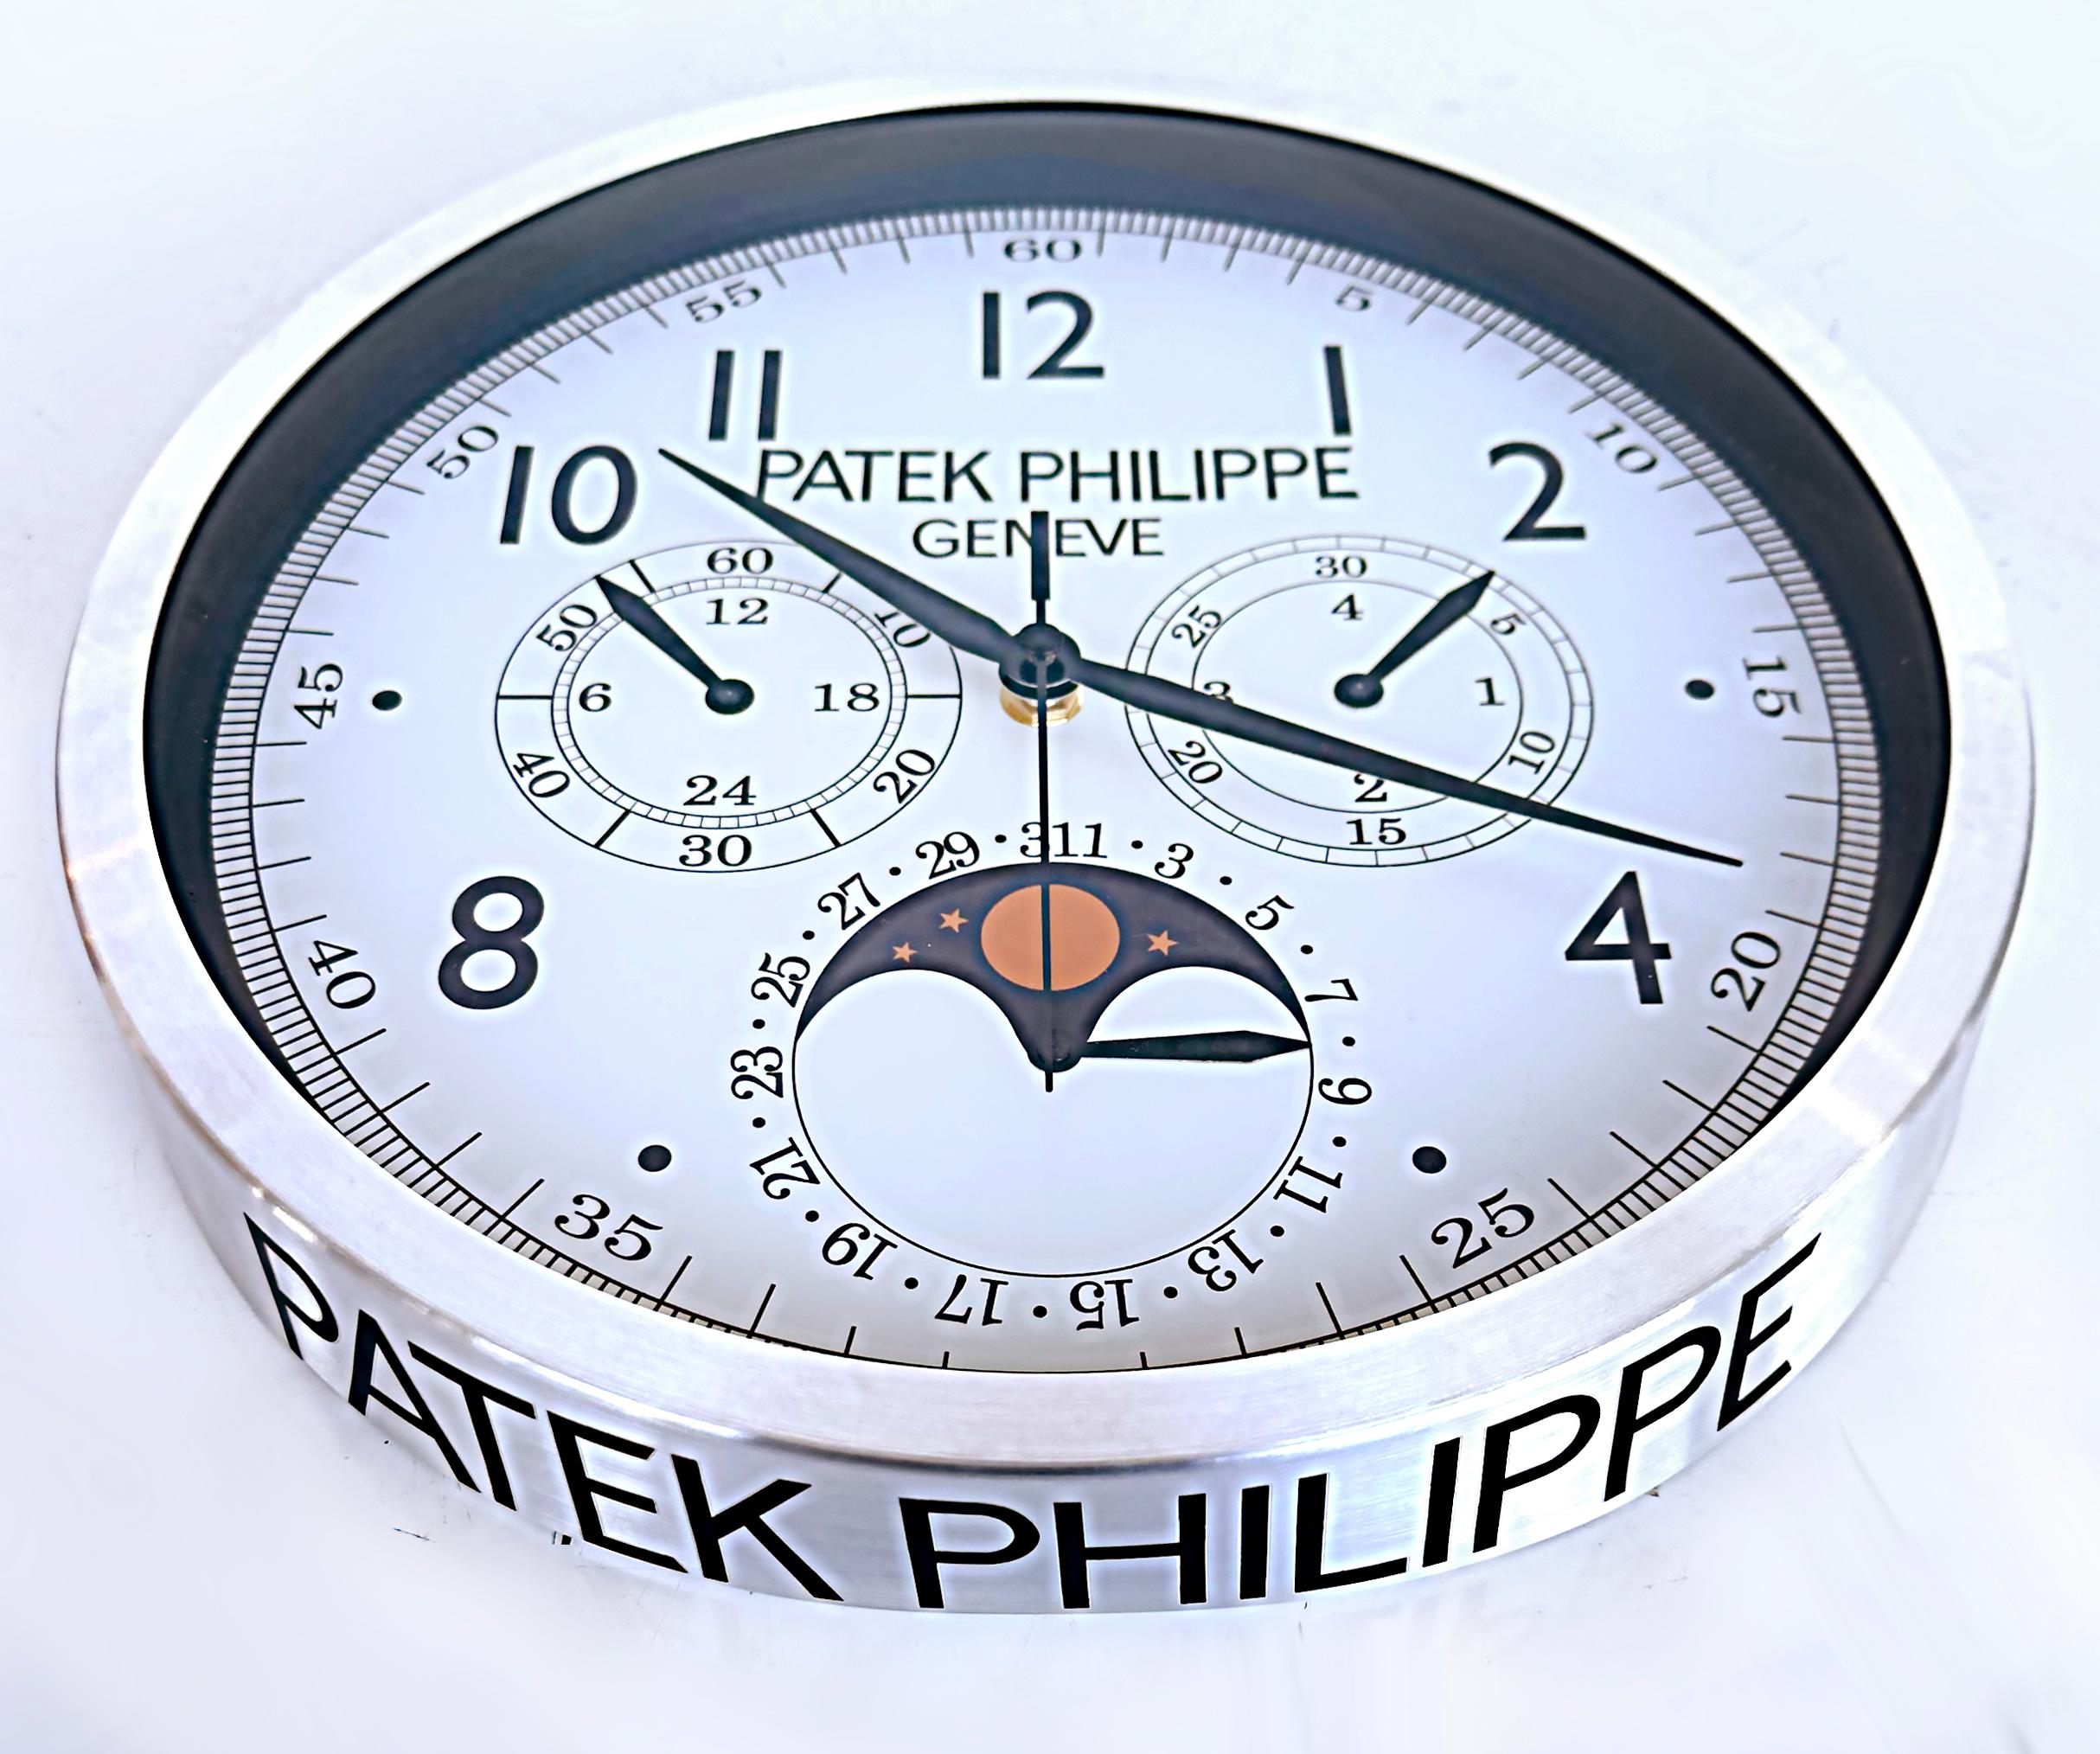 Patek Philippe, Switzerland dealer's advertising wall clock.

Offered for sale is a Patek Philippe (Geneve, Switzerland) dealer's advertising chronograph wristwatch model wall clock. This is a great gift for the watach lover. The clock is